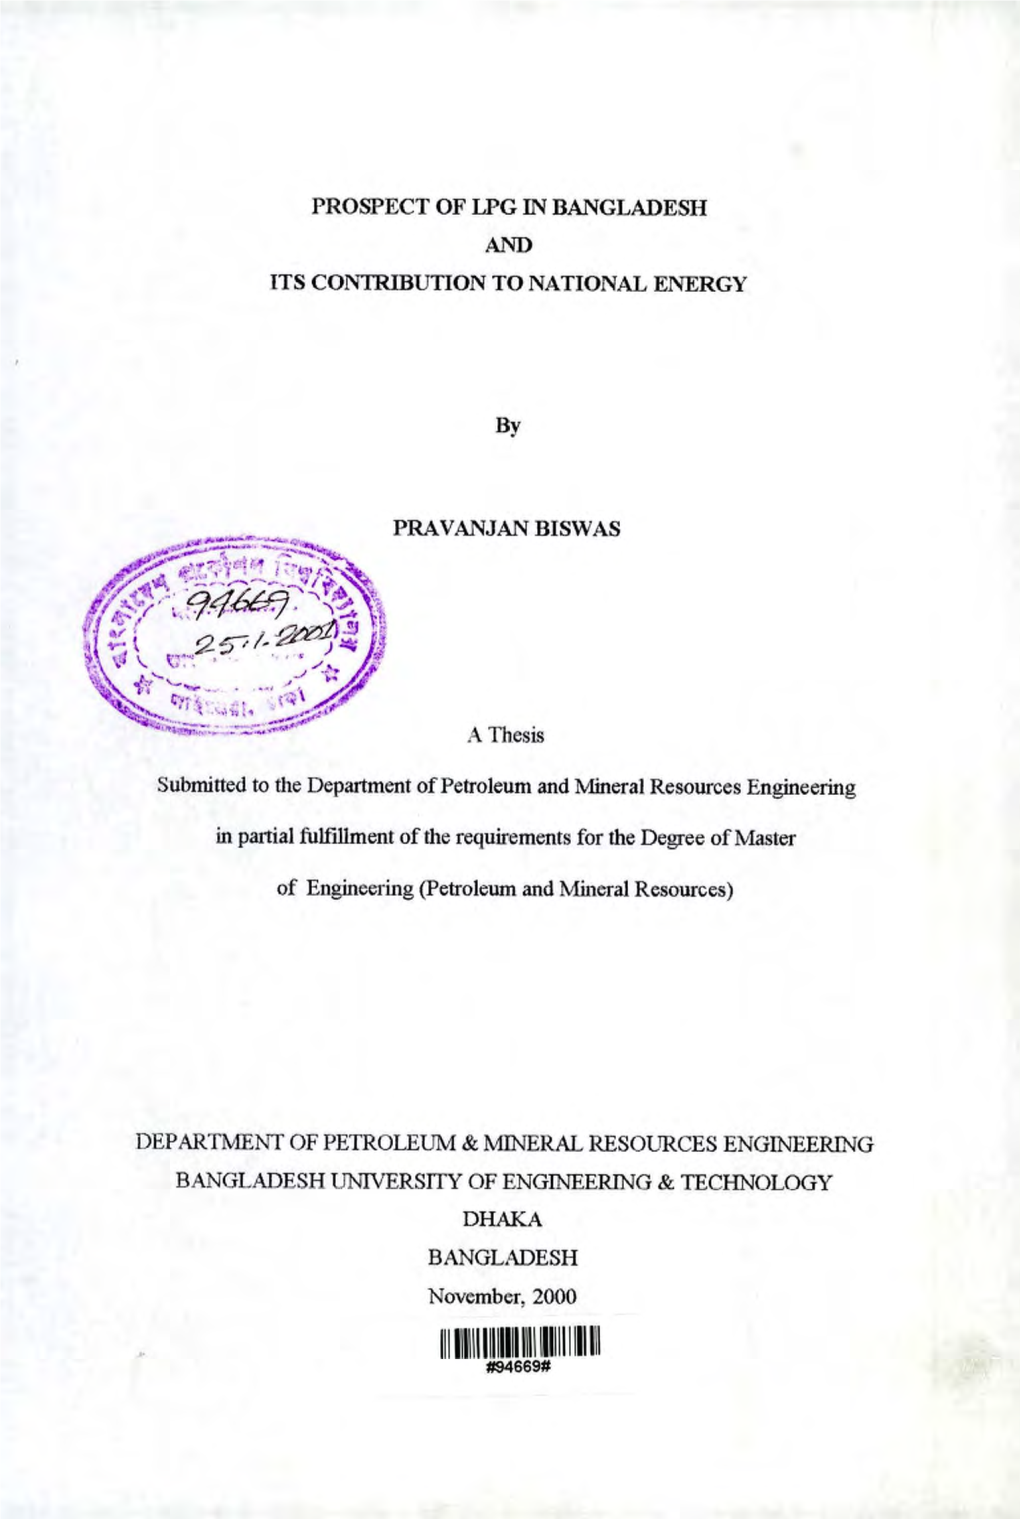 PROSPECT of LPG in BANGLADESH and ITS Conlribution to NATIONAL ENERGY PRA VANJAN BISW AS a Thesis Submitted to the Department Of